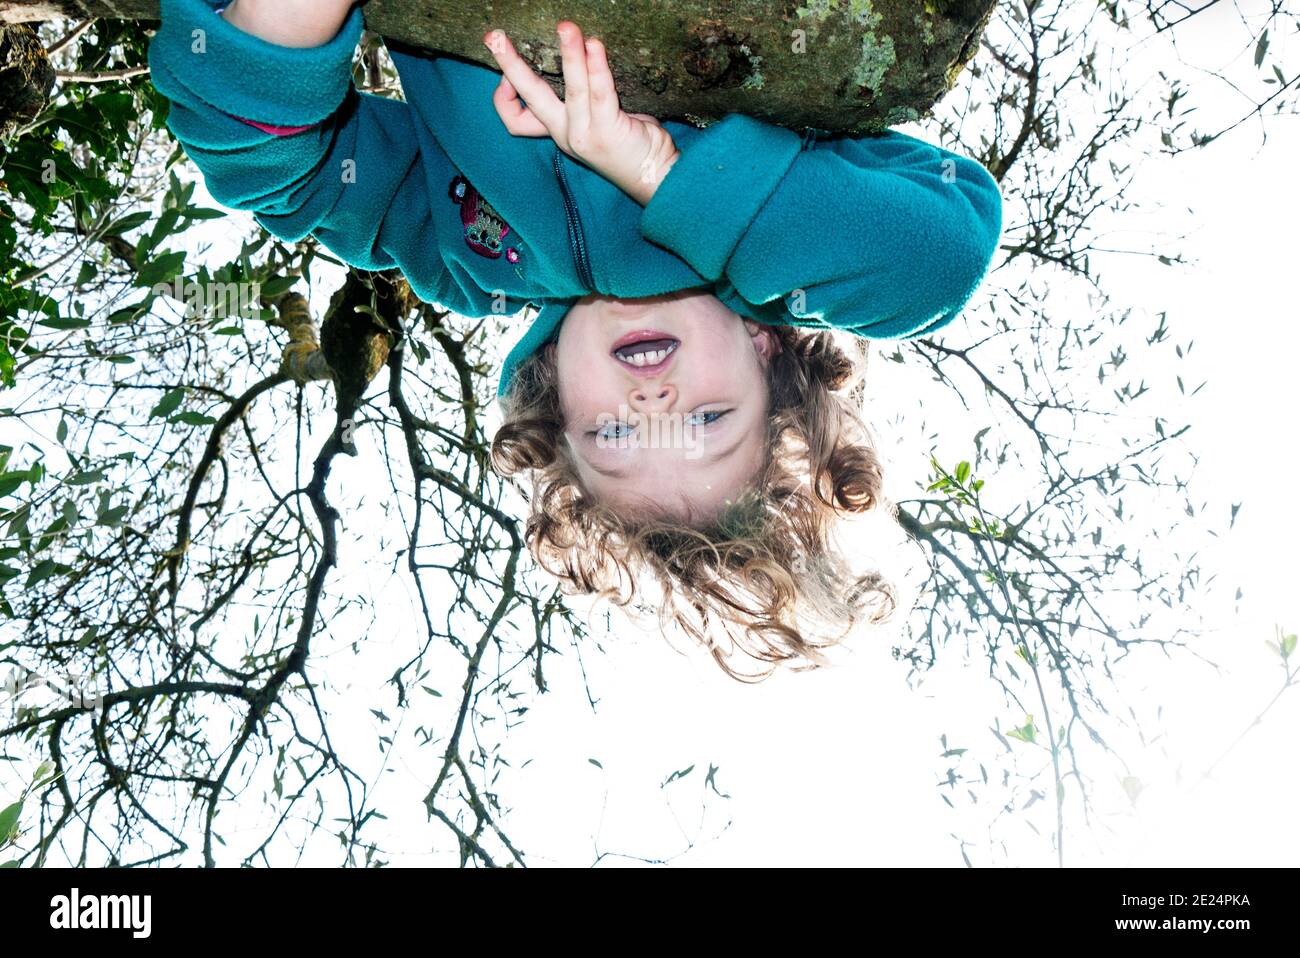 Girl Hanging Upside Down In A Tree Italy Stock Photo Alamy